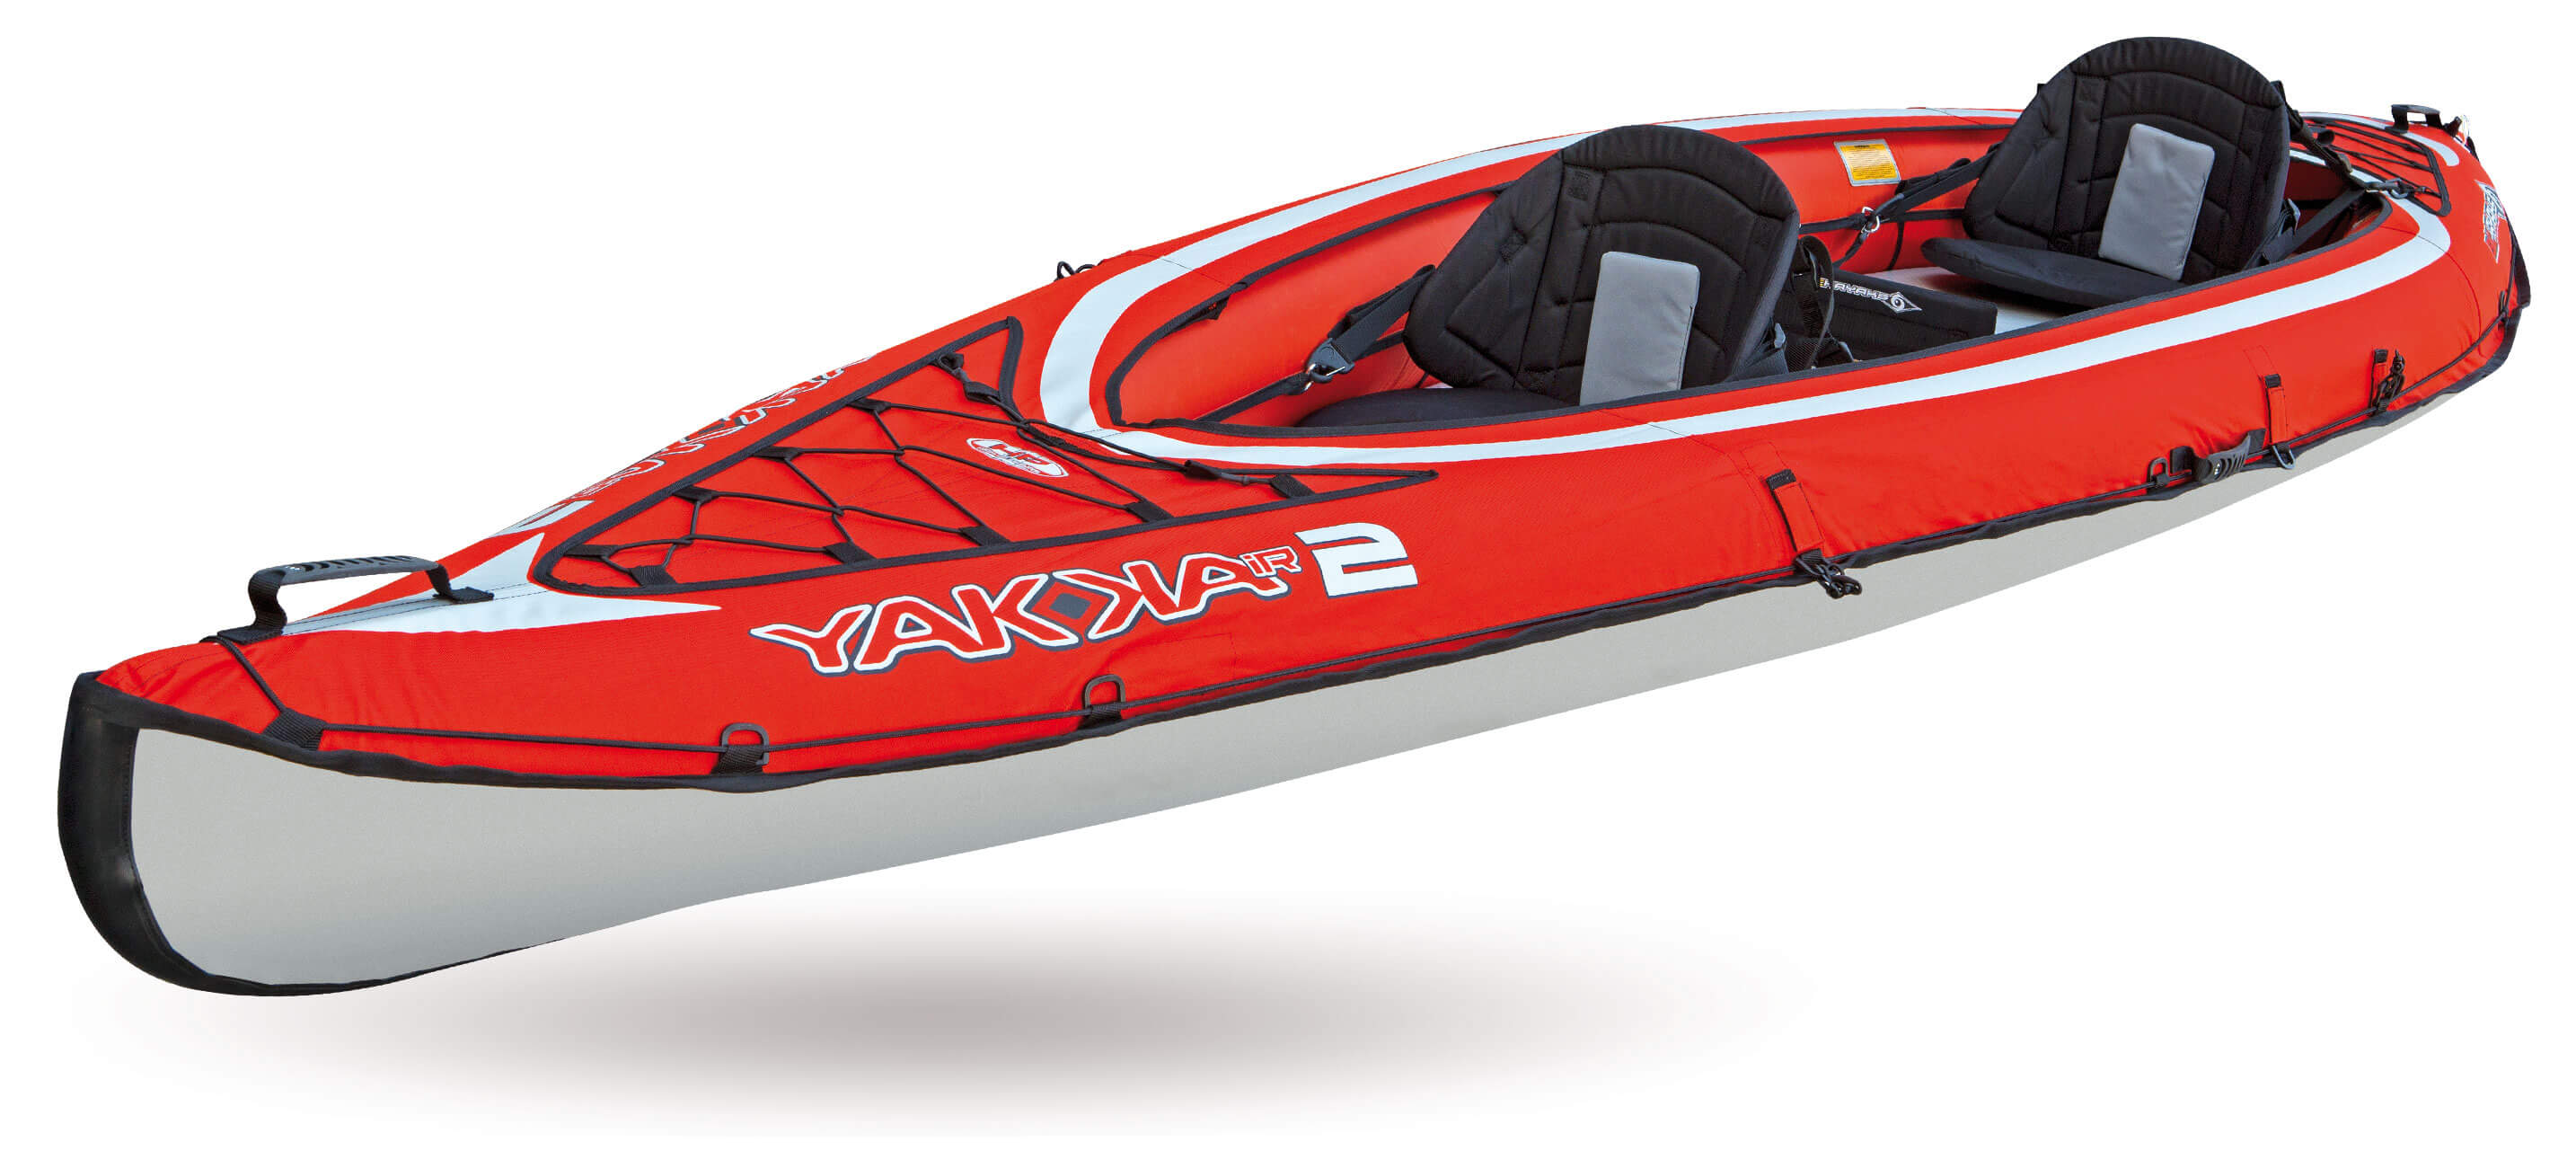 The range for sea kayaks, inflatables and suitable for fishing